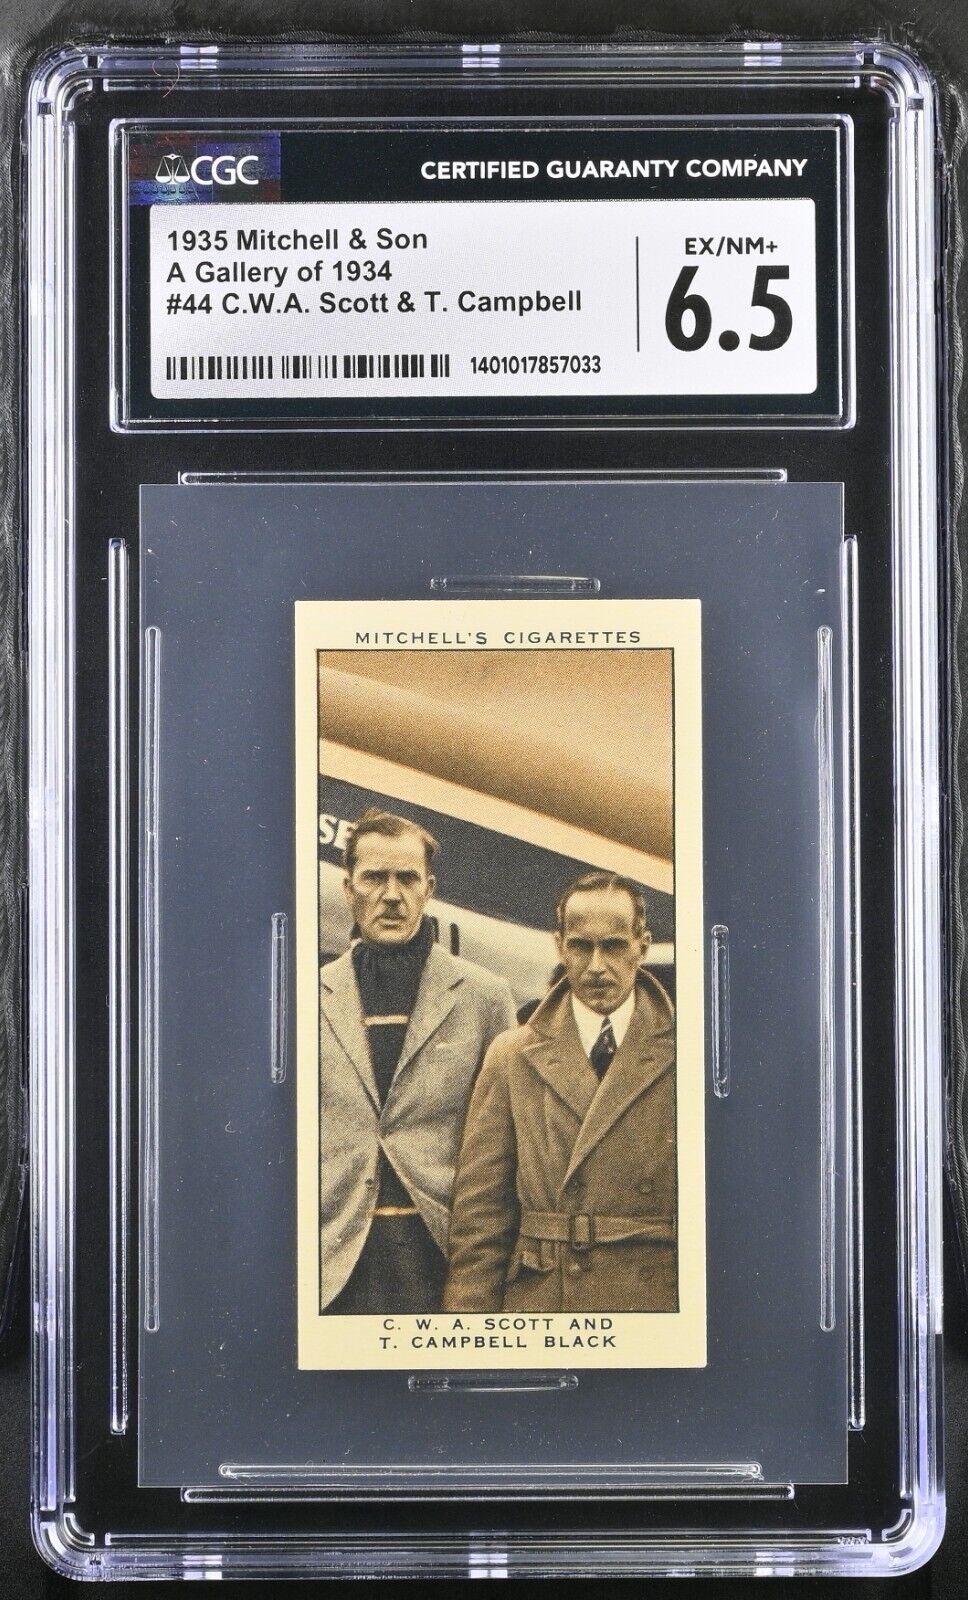 1935 Mitchell & Son, A Gallery of 1934 44 C.W.A Scott &T. Campbell Black CGC 6.5